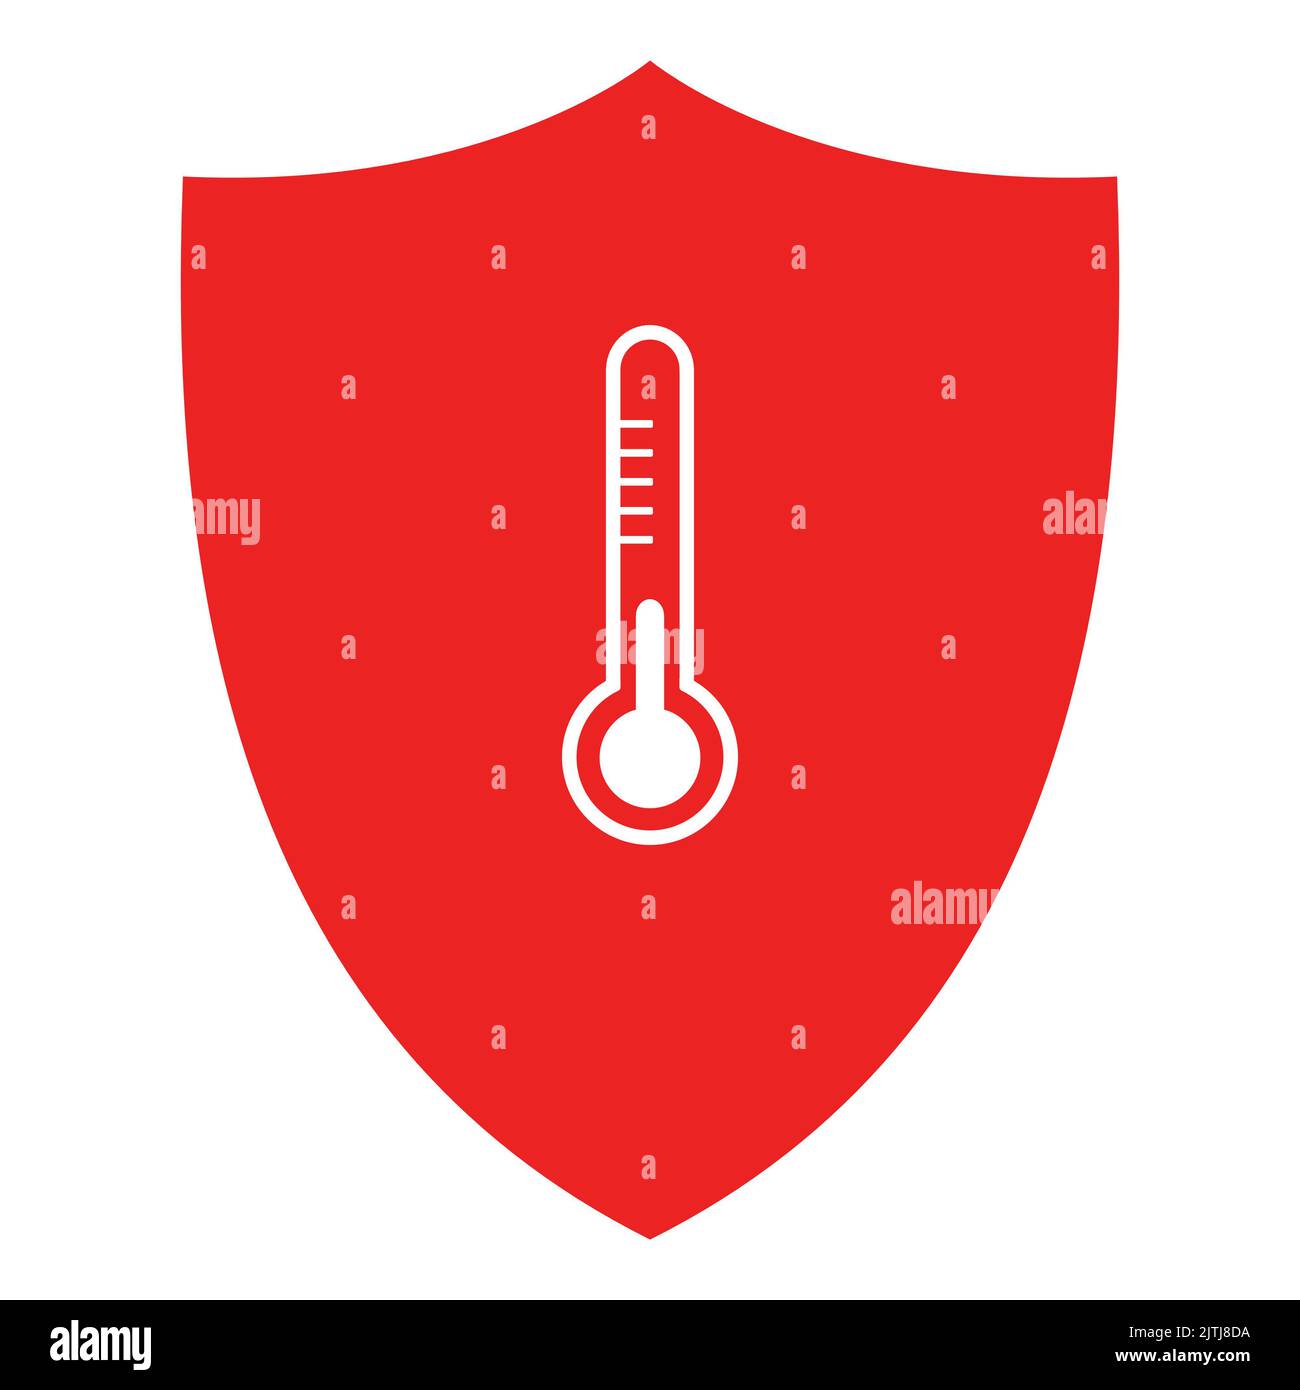 Thermometer and shield Stock Photo